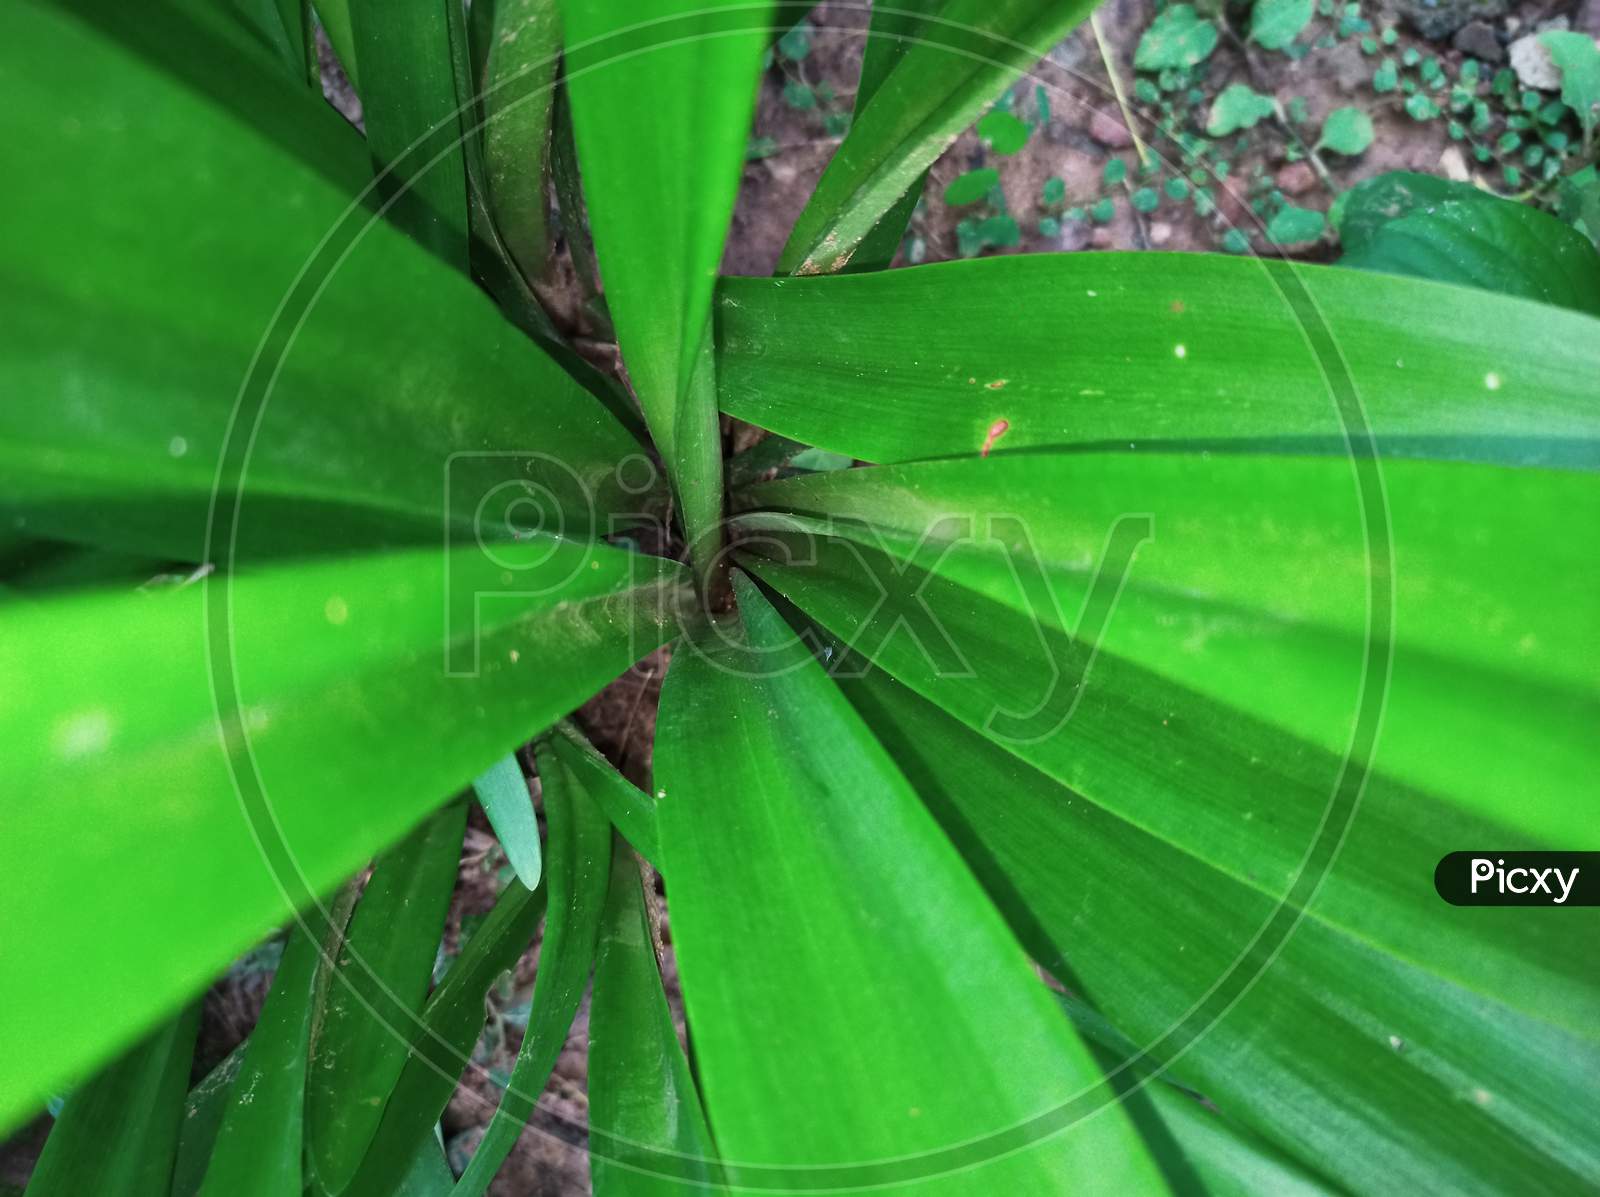 Closeup Nature View Of Green Leaf On Blurred Greenery Background